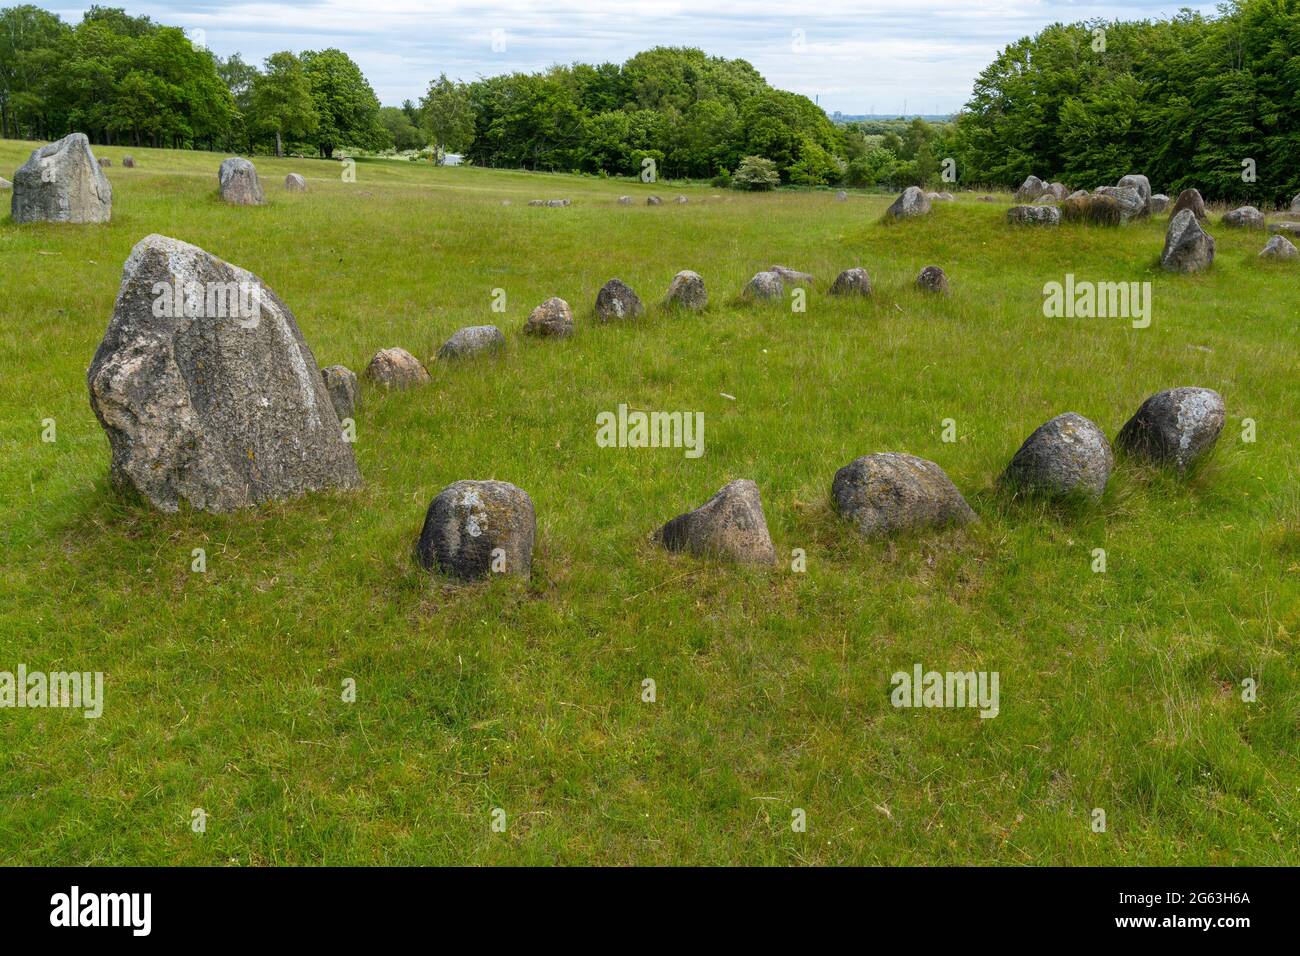 A view of the grounds of the Lindholm Hills Viking burial site in northern Denmark Stock Photo